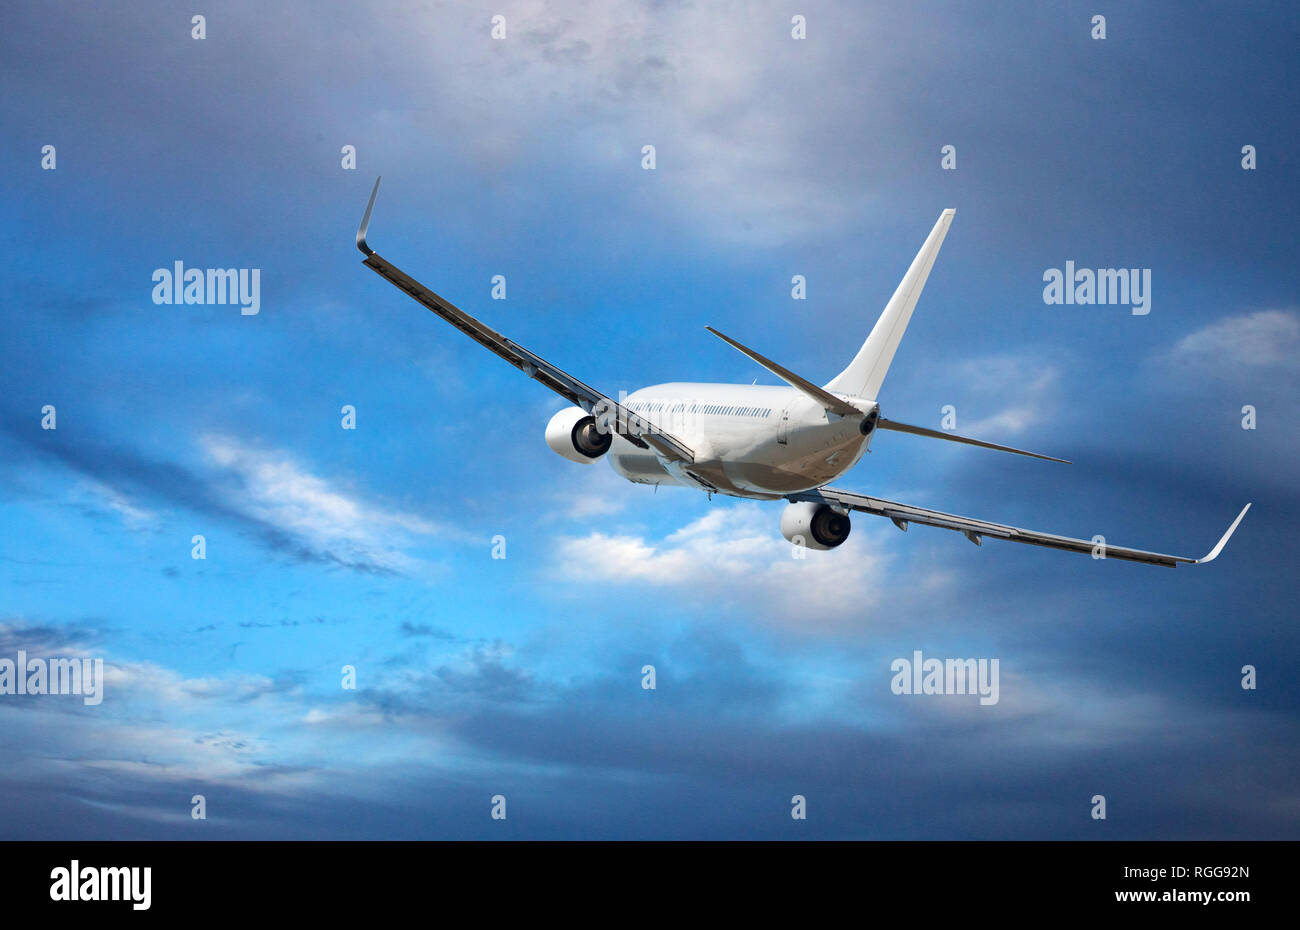 White passenger wide-body plane. Aircraft is flying in blue cloudy sky Stock Photo